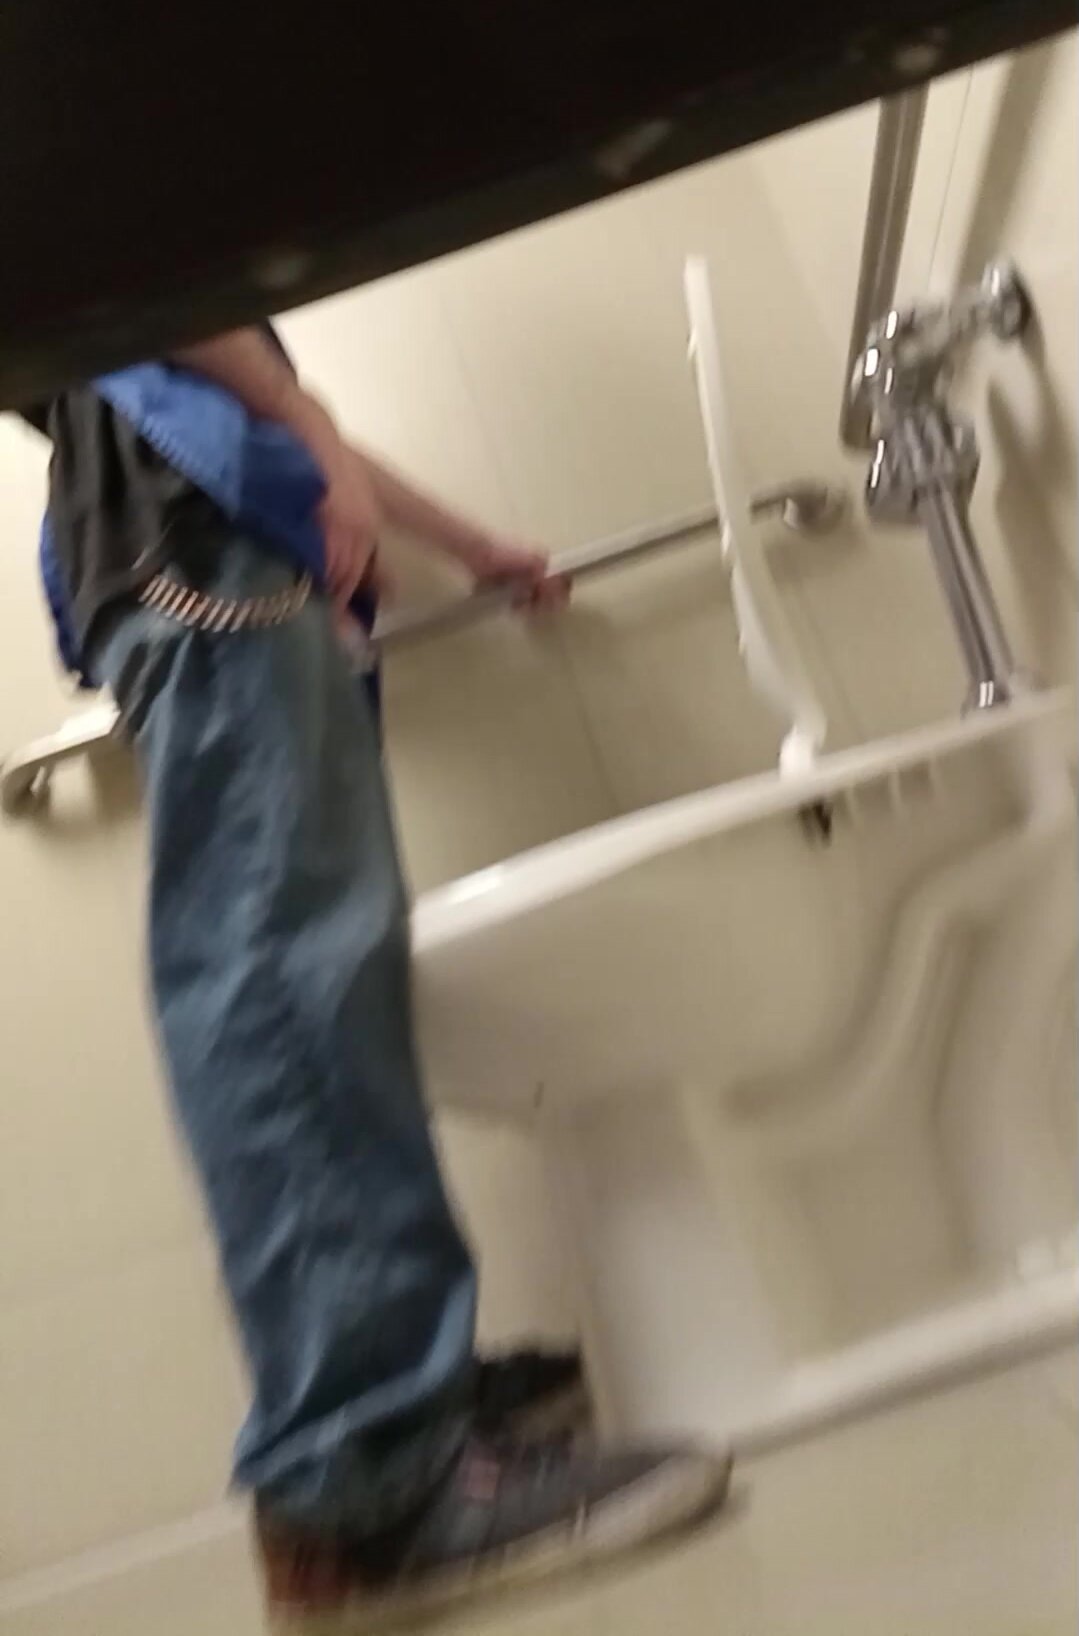 Store worker taking a quick piss